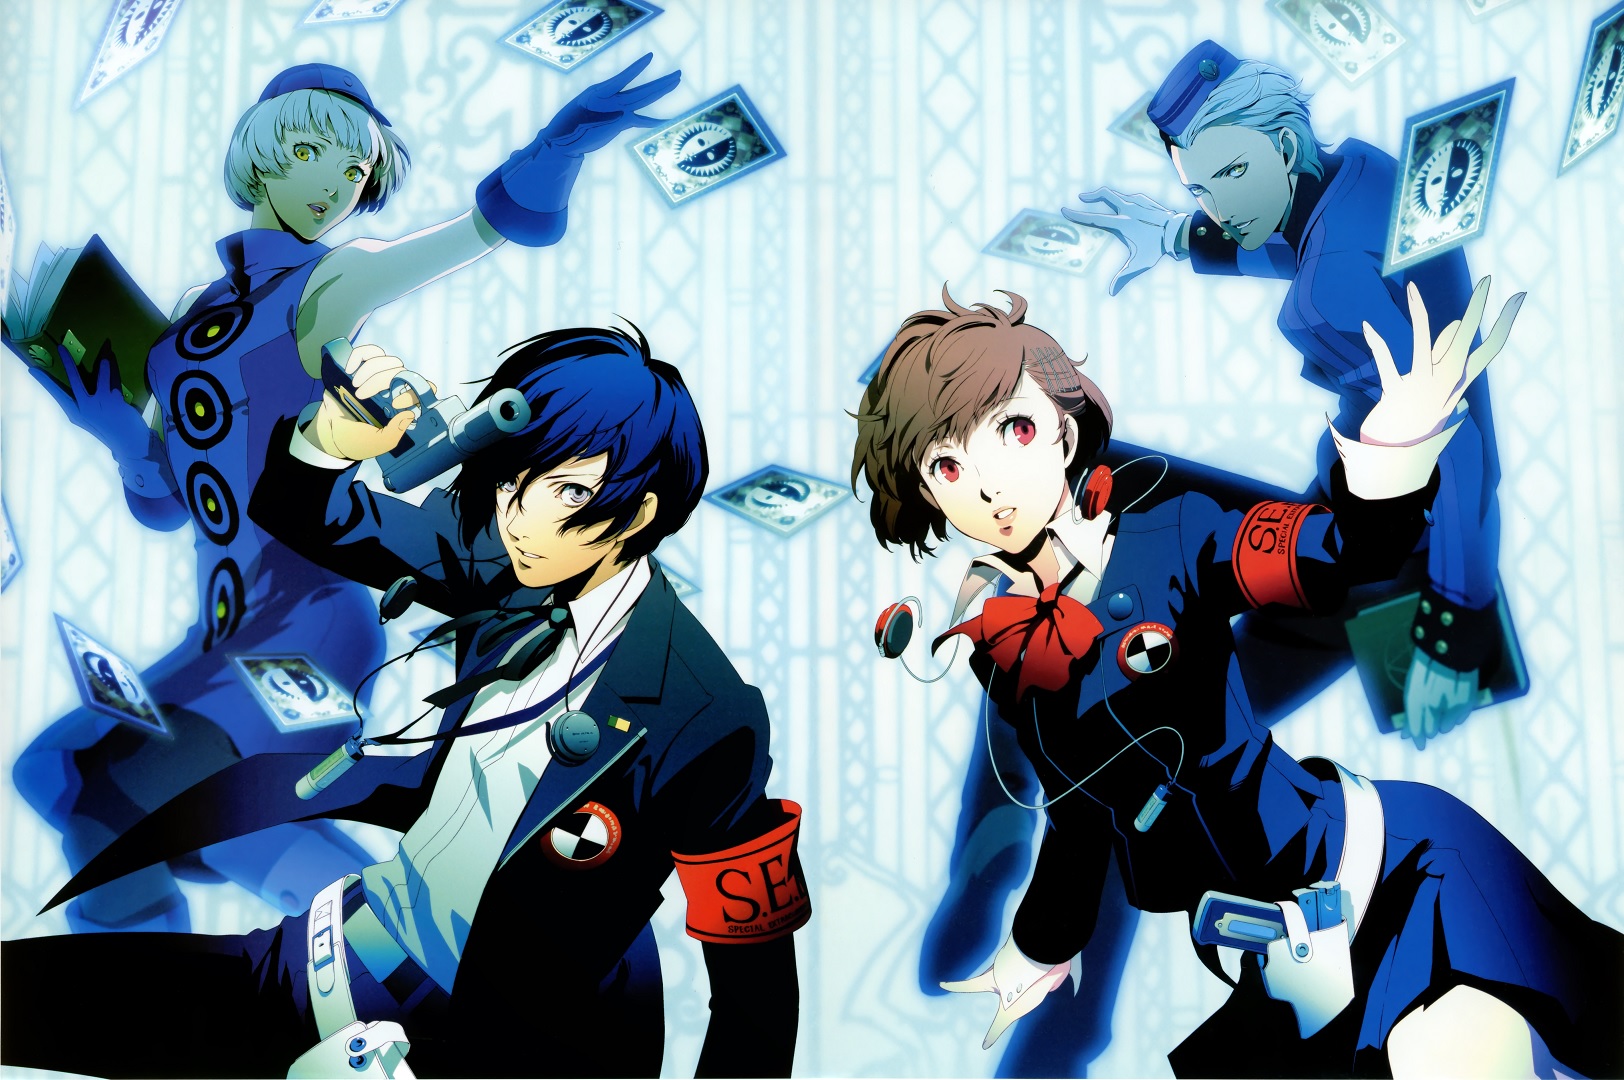 Persona 3's new remaster shows how far the series has come